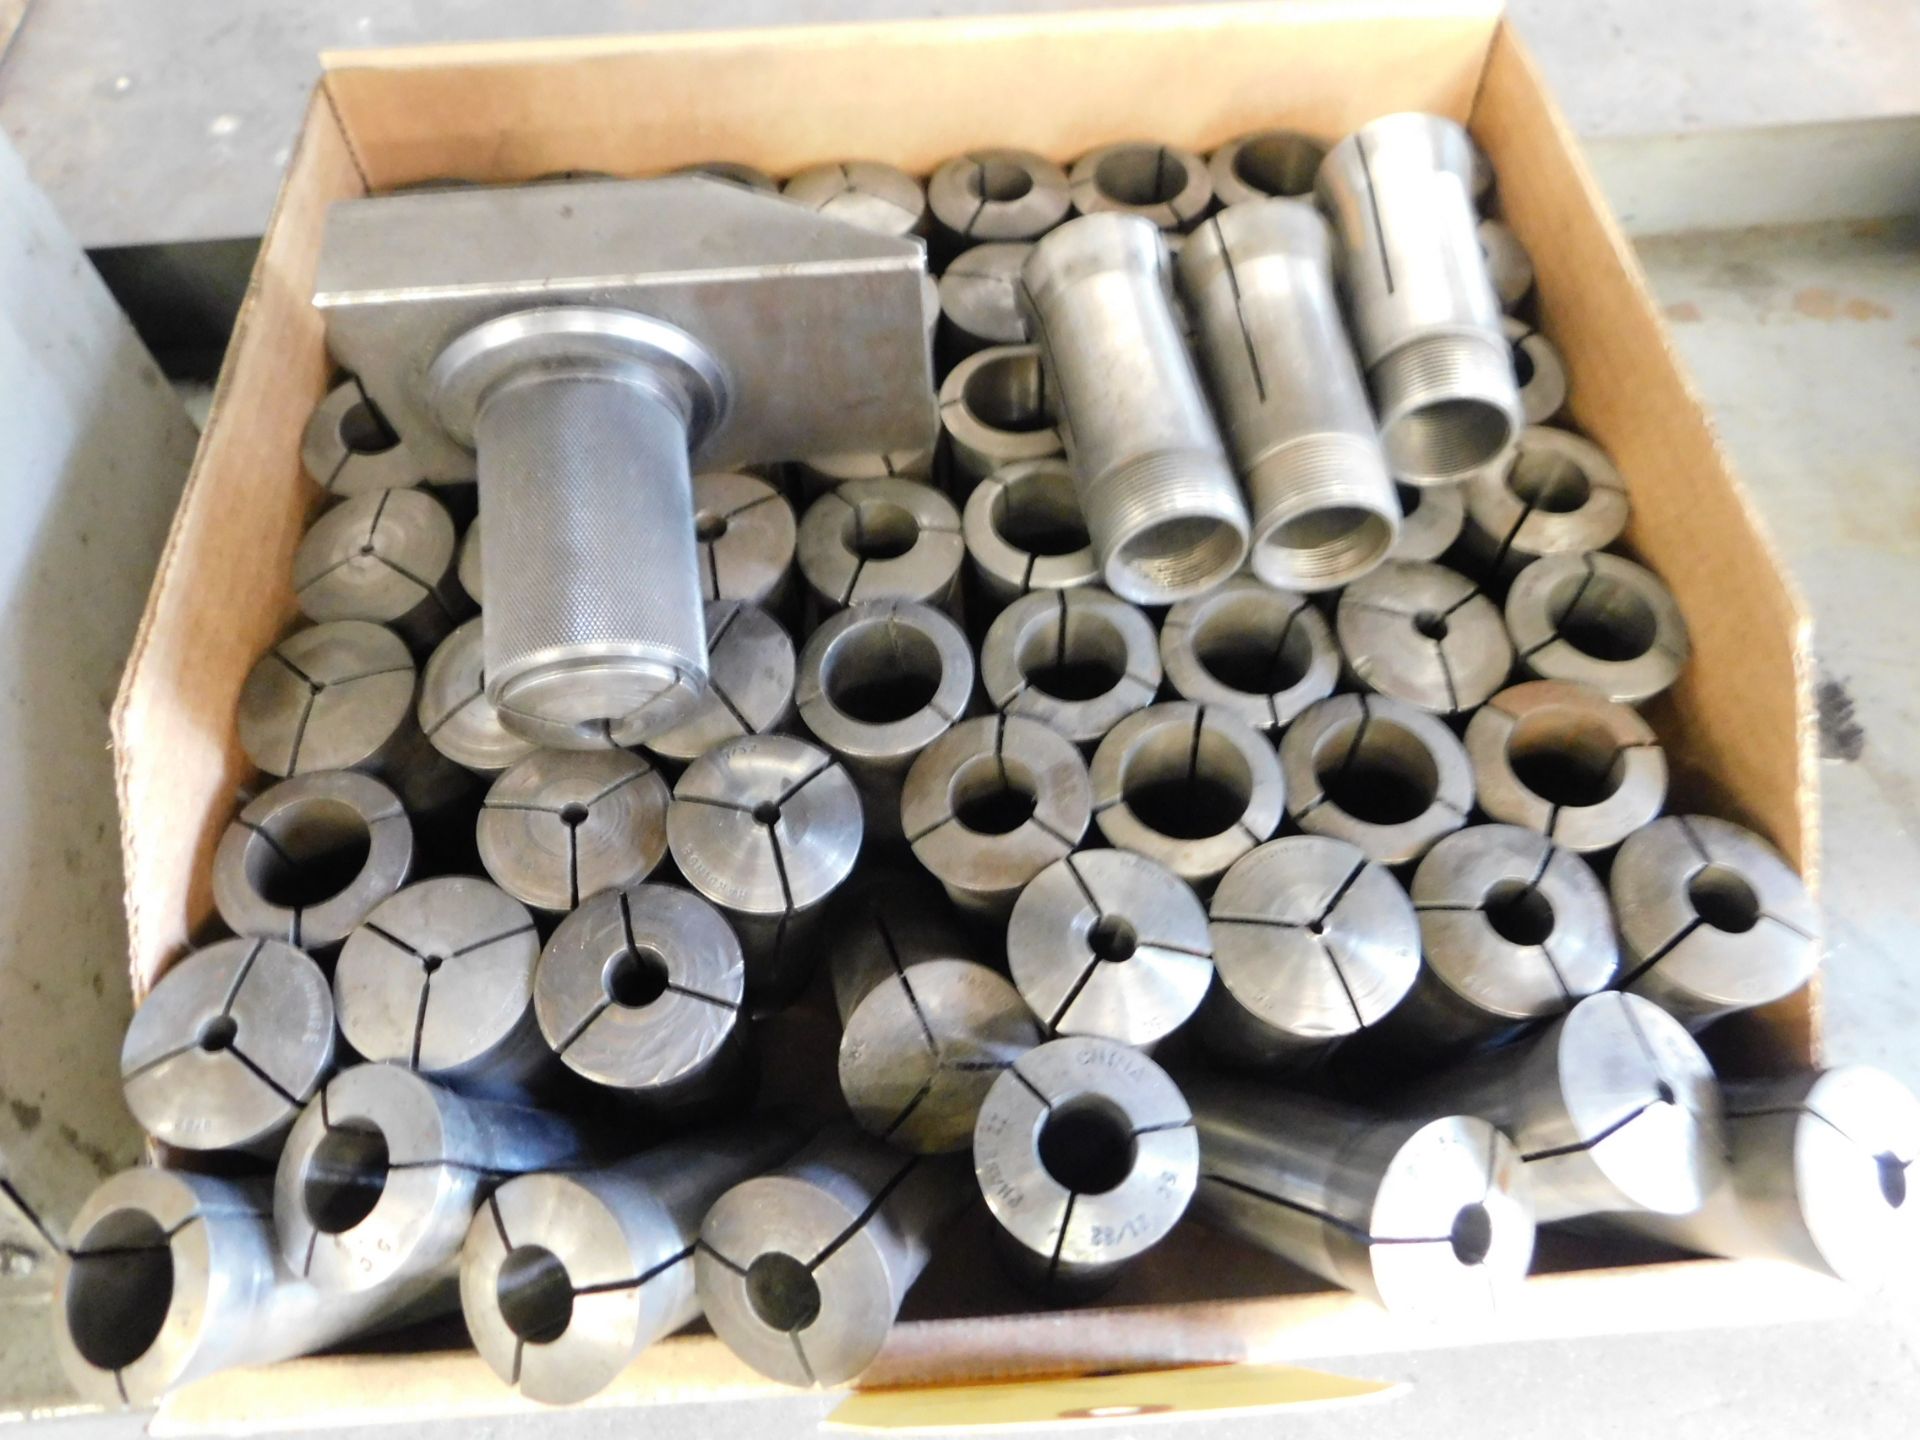 5C Collets and 5C Collet Fixture